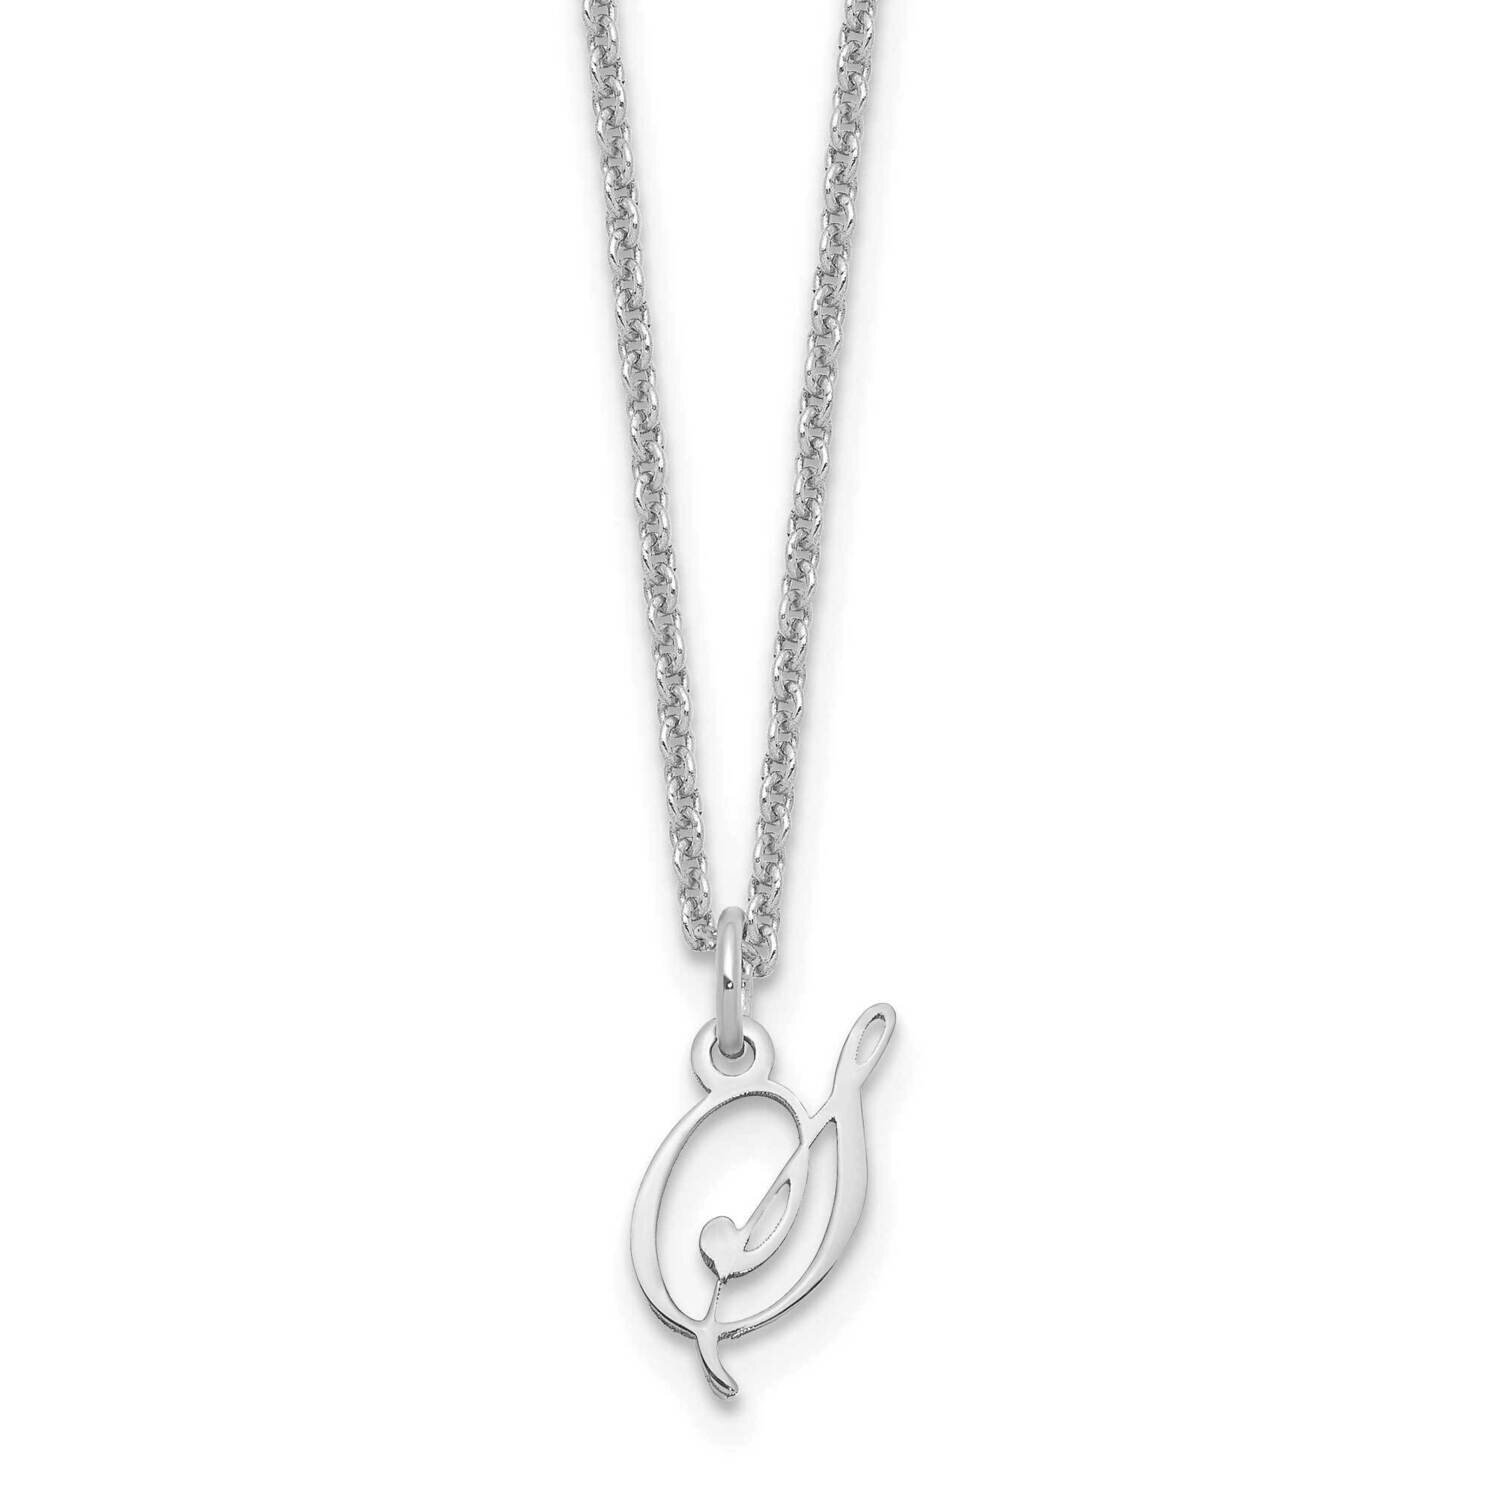 Letter S Initial Necklace 14k White Gold XNA756W/S